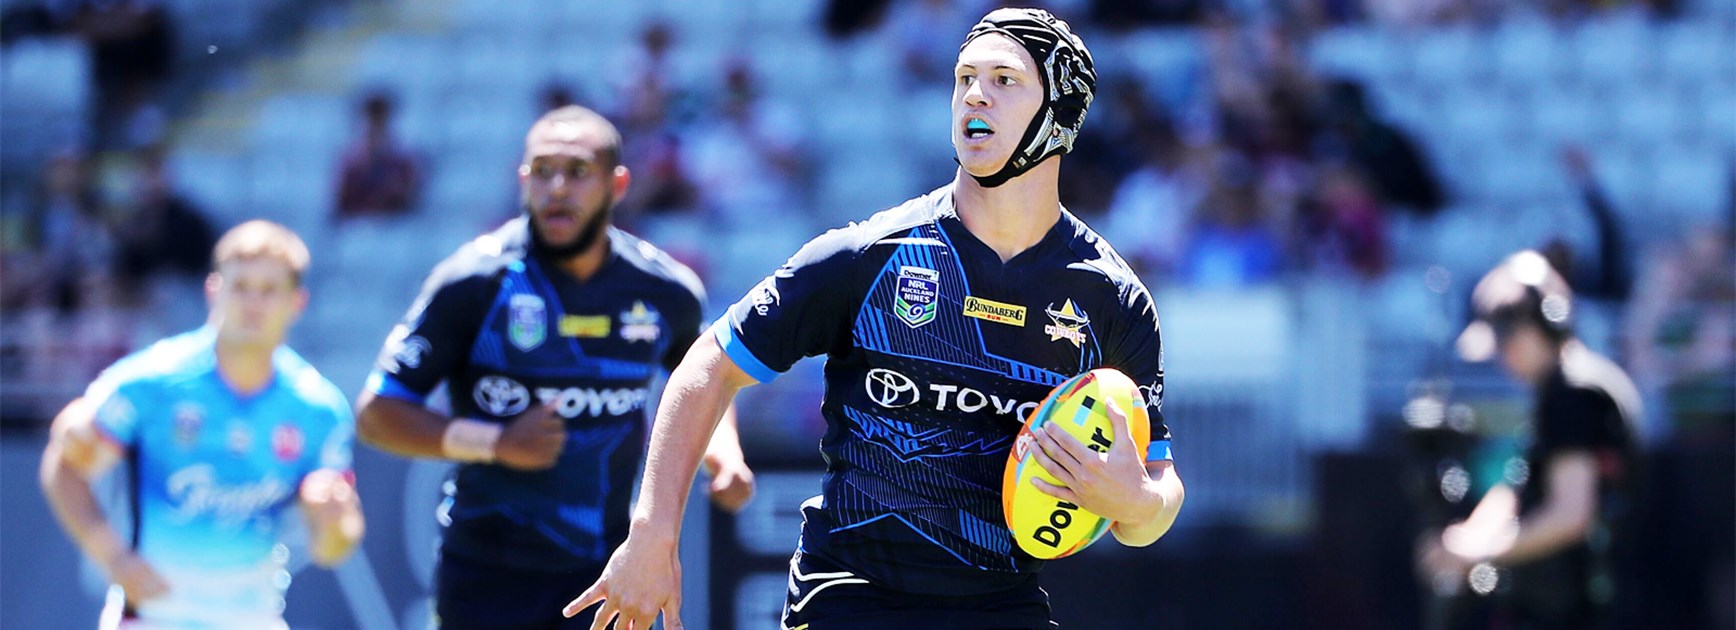 Kalyn Ponga runs clear to score an intercept try against the Roosters at the Auckland Nines.